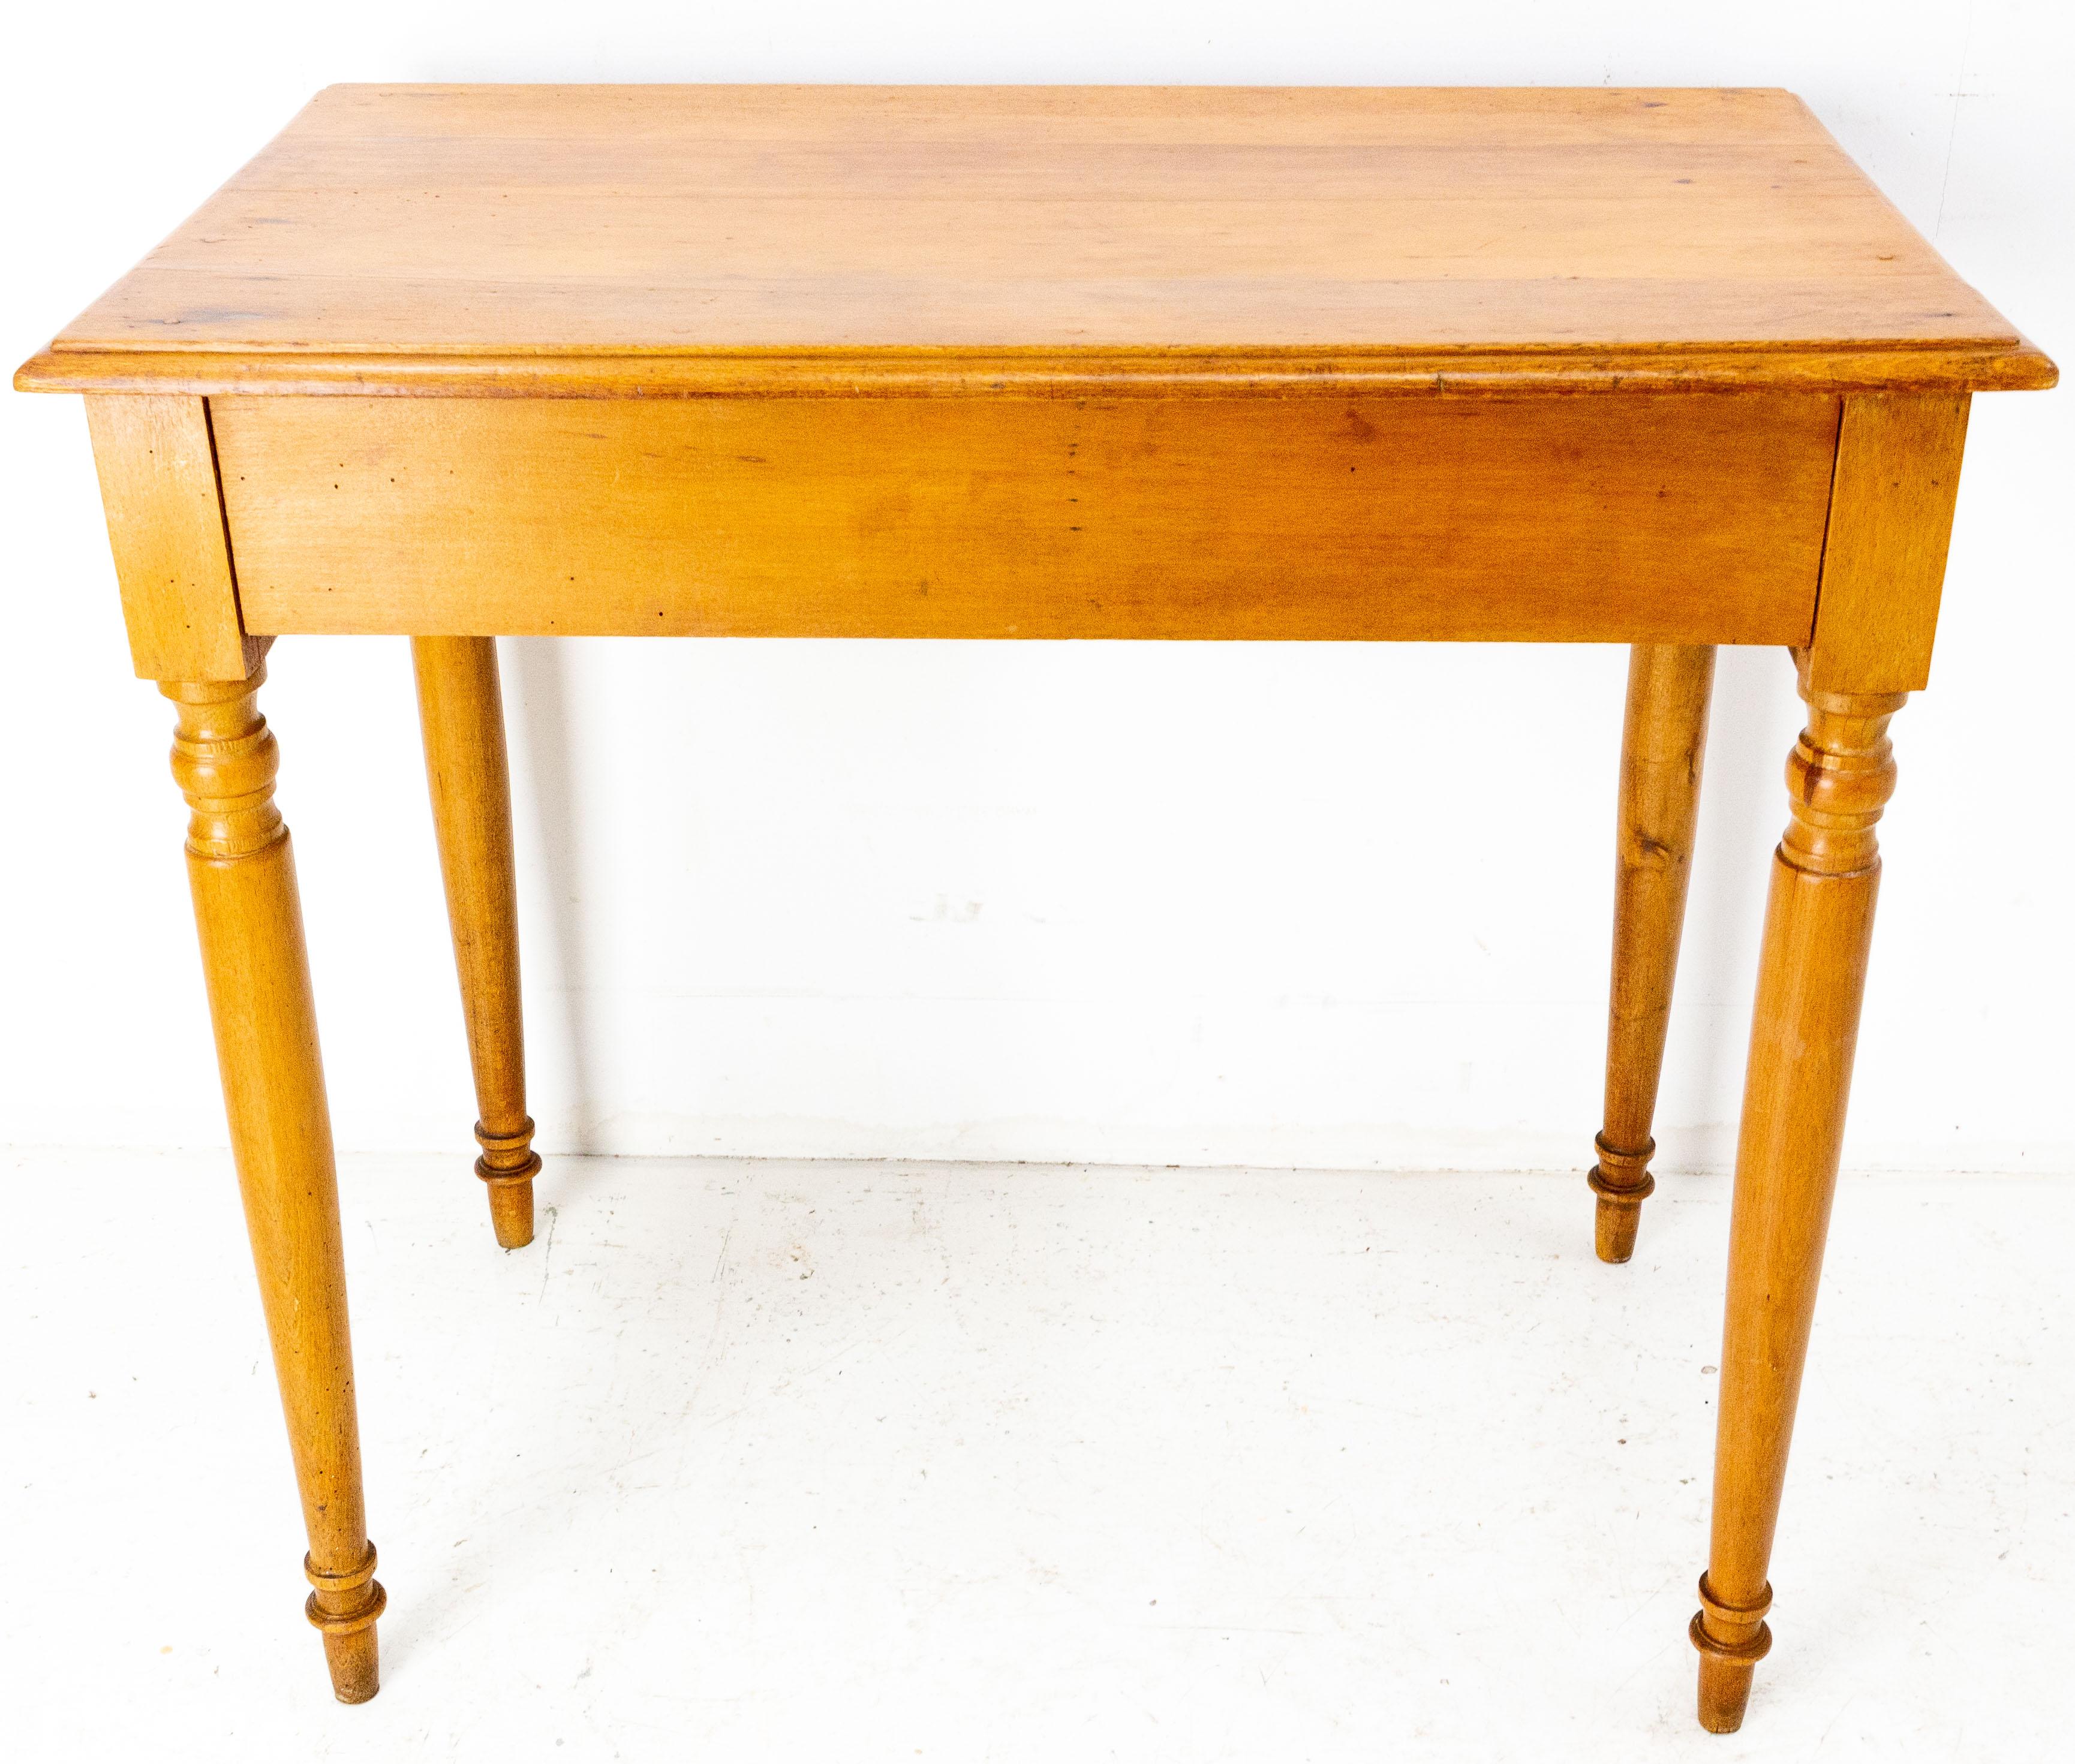 French Art Nouveau Beech Writing Table, Desk or Side Table, circa 1900 For Sale 3